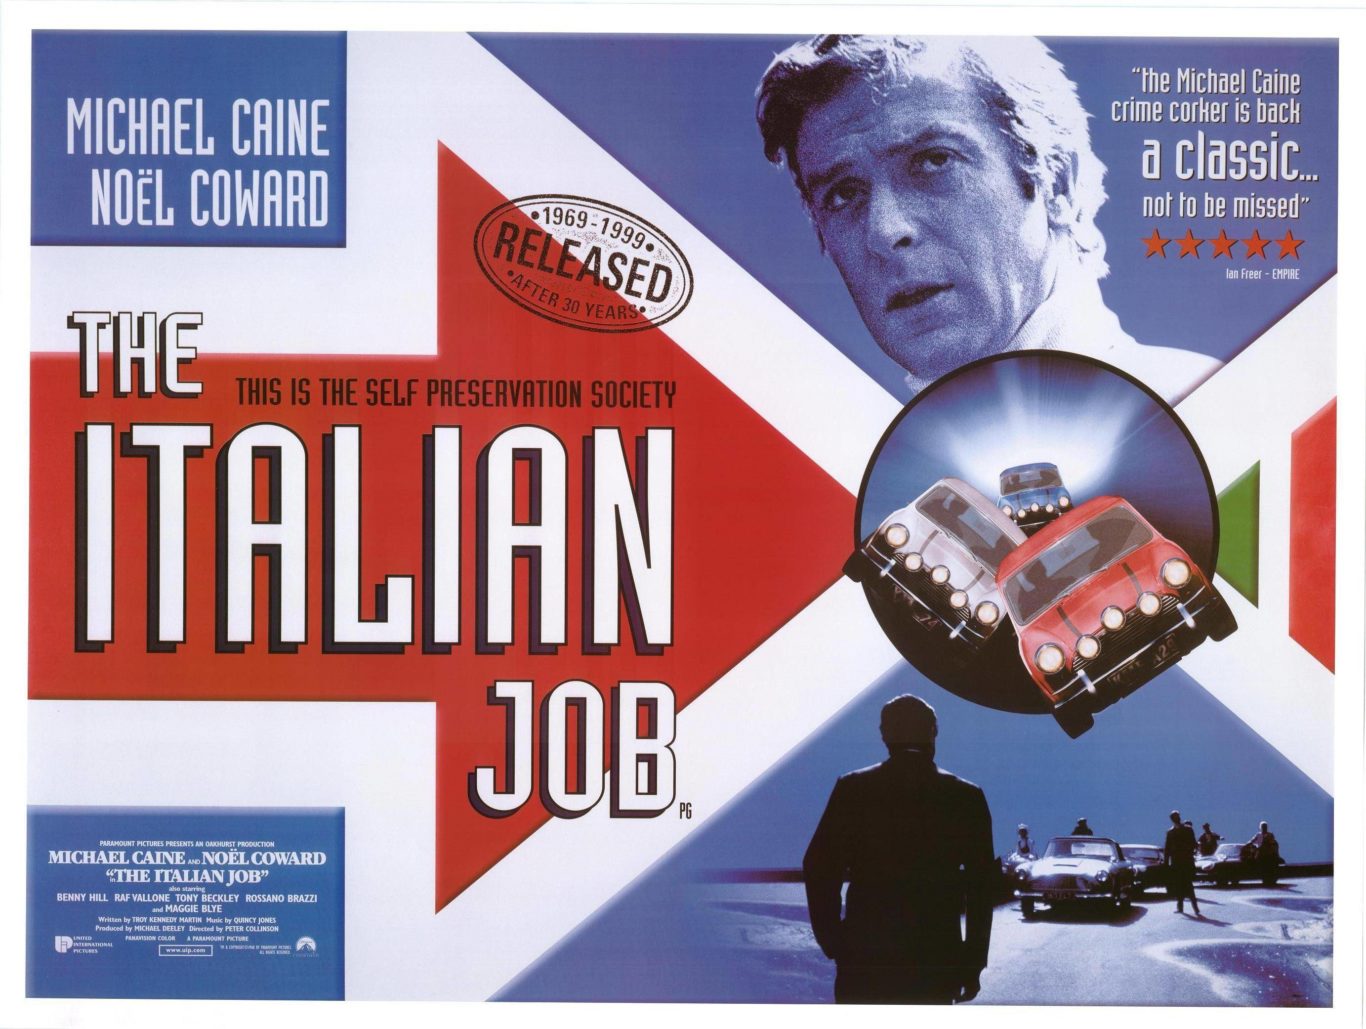 The Italian Job is one of the greatest UK films of all time